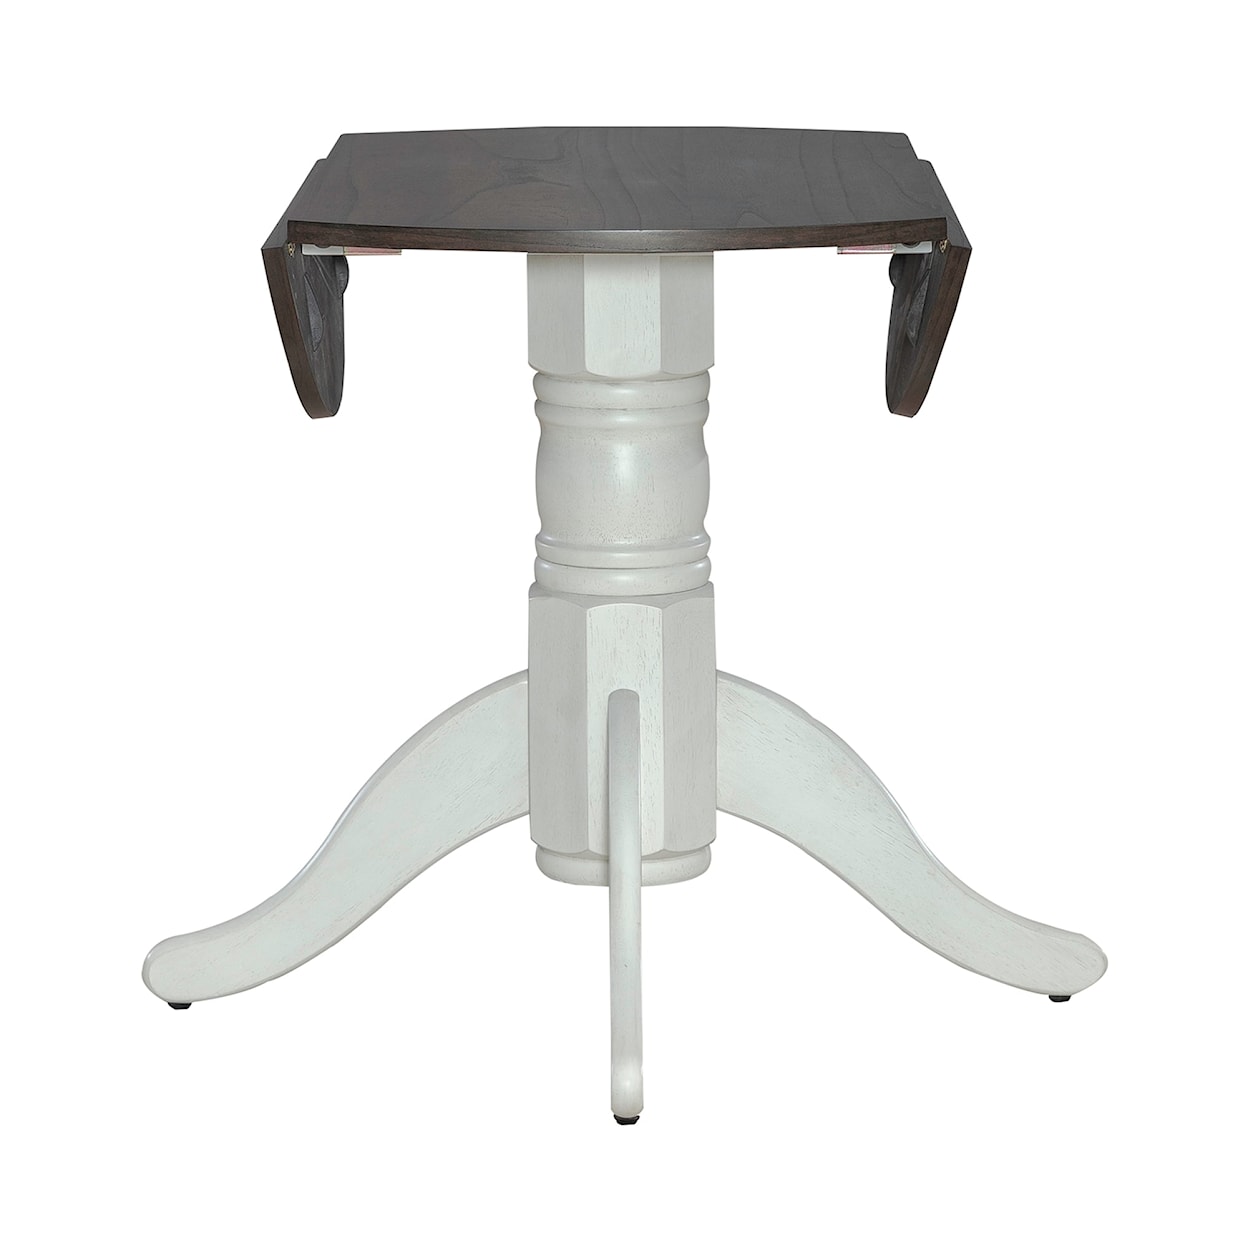 Libby Brook Bay Round Pedestal Table